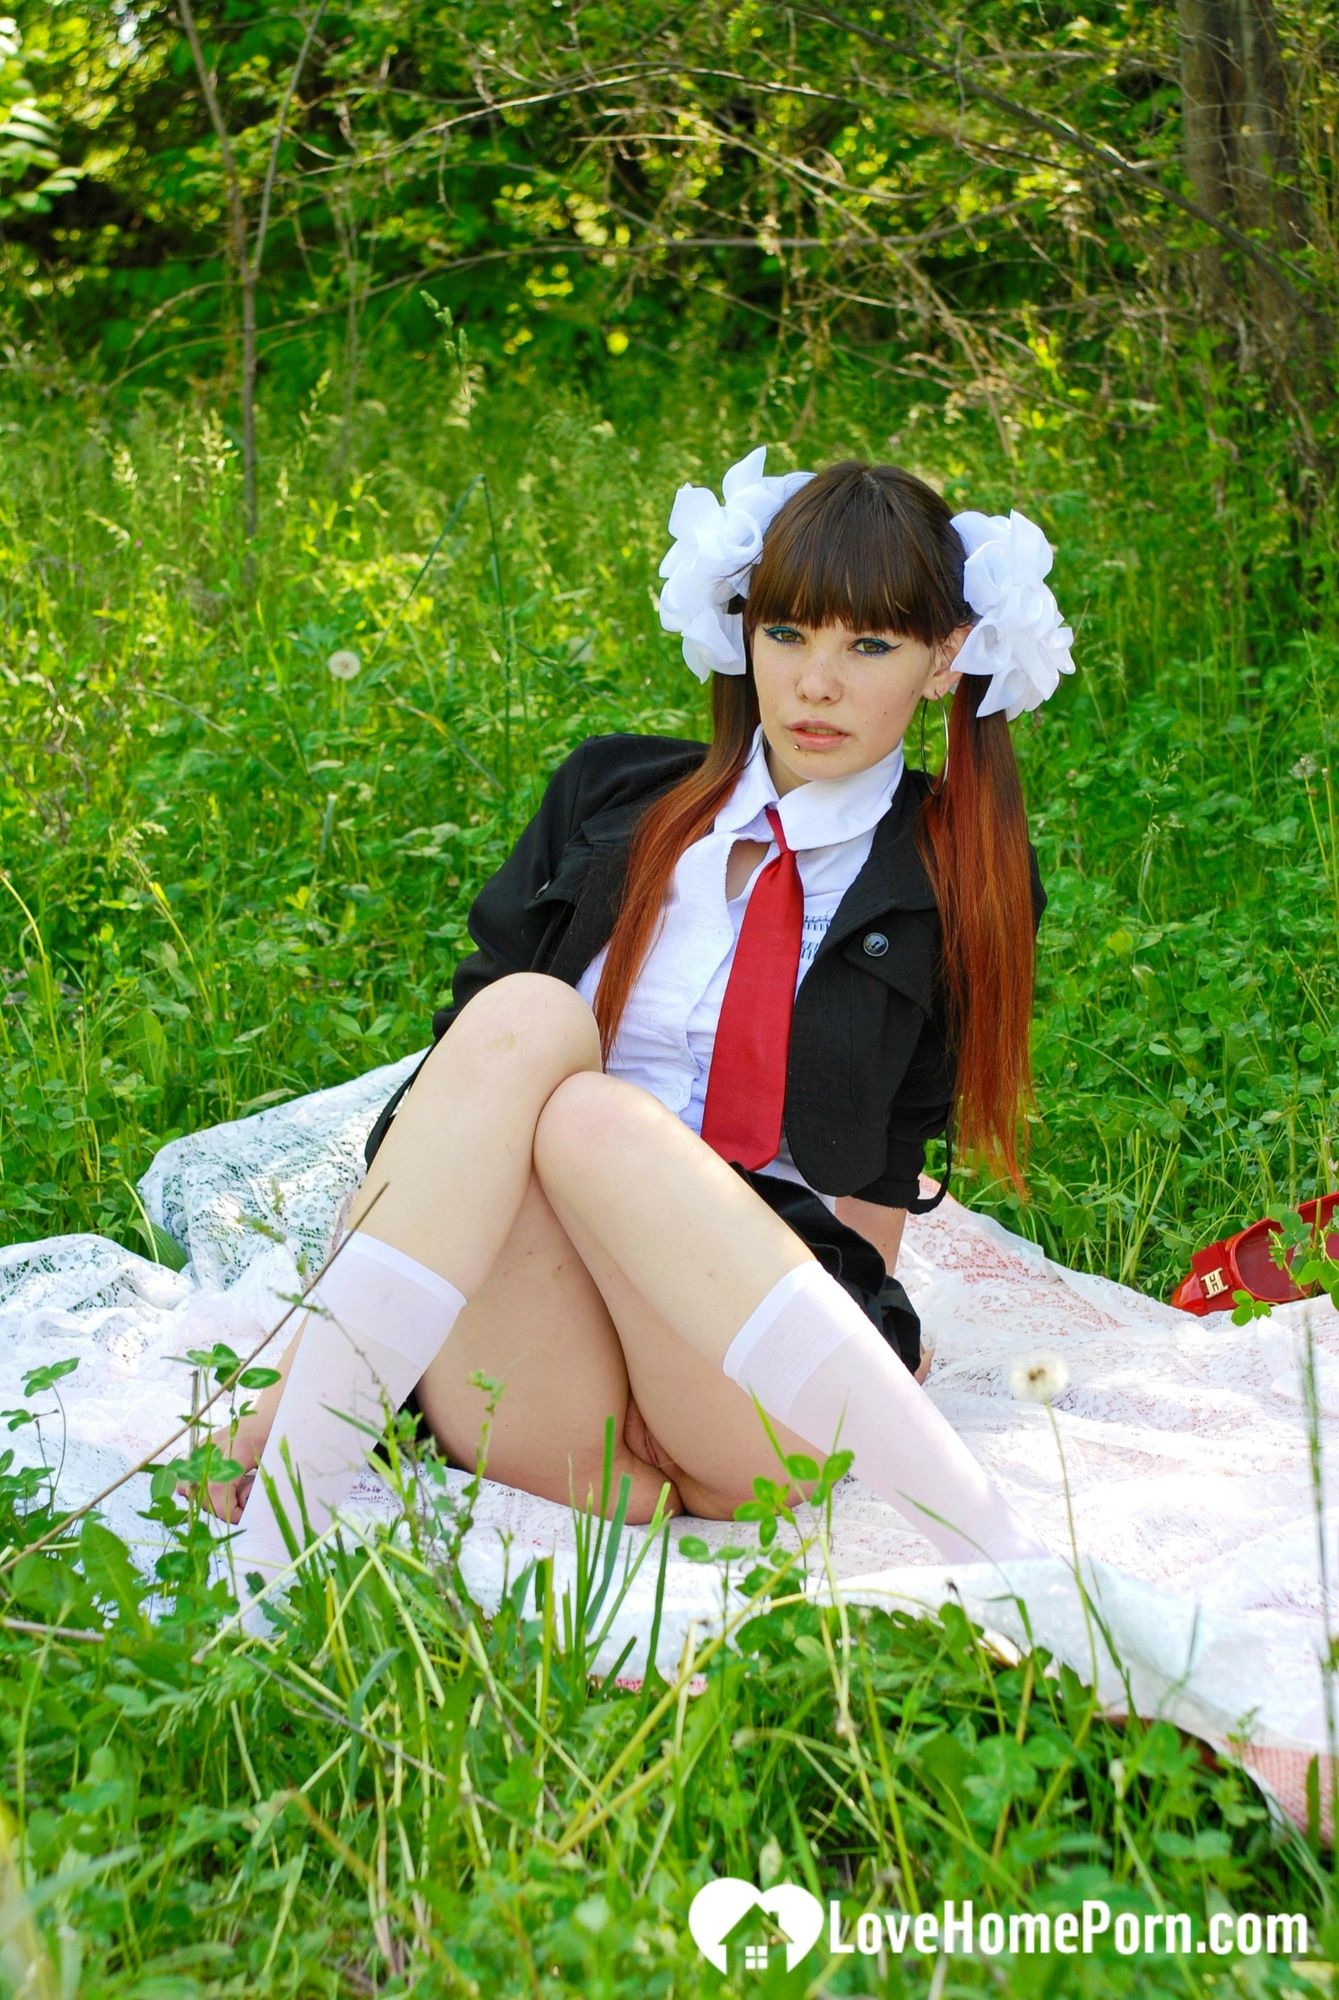 Schoolgirl turns a picnic into a teasing session #3